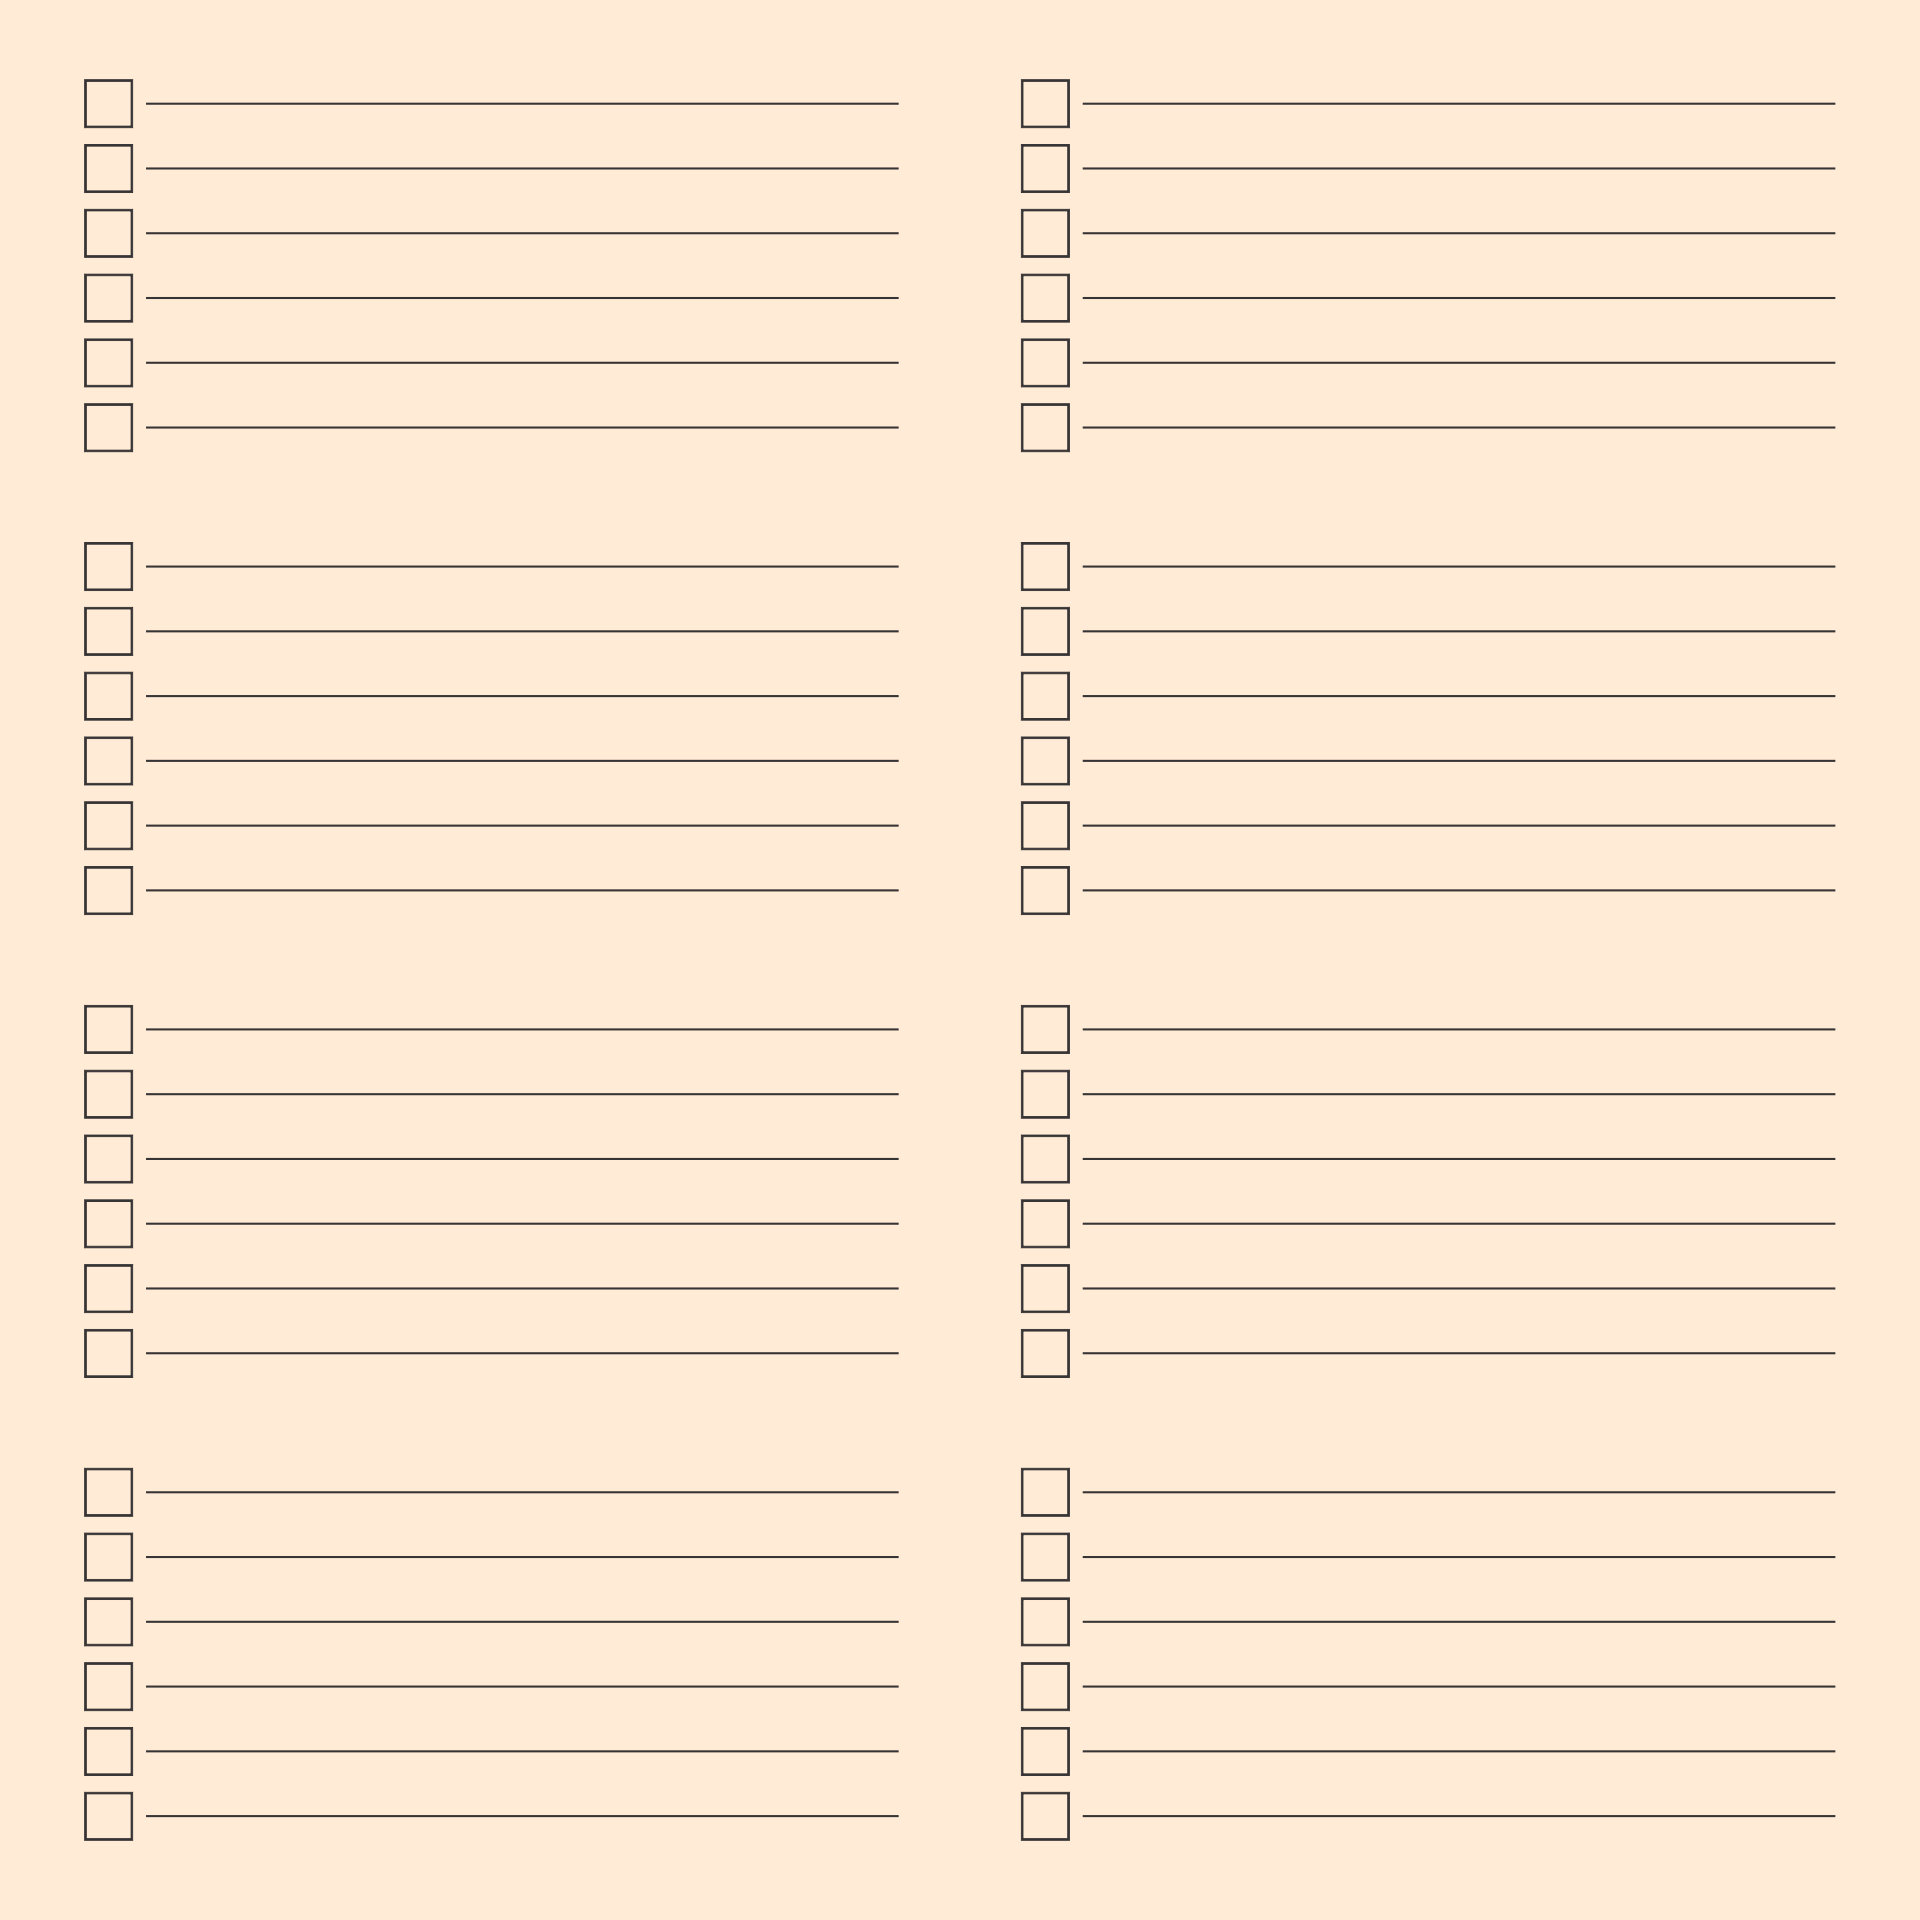 Daily Checklist Blank Template Images And Photos Finder